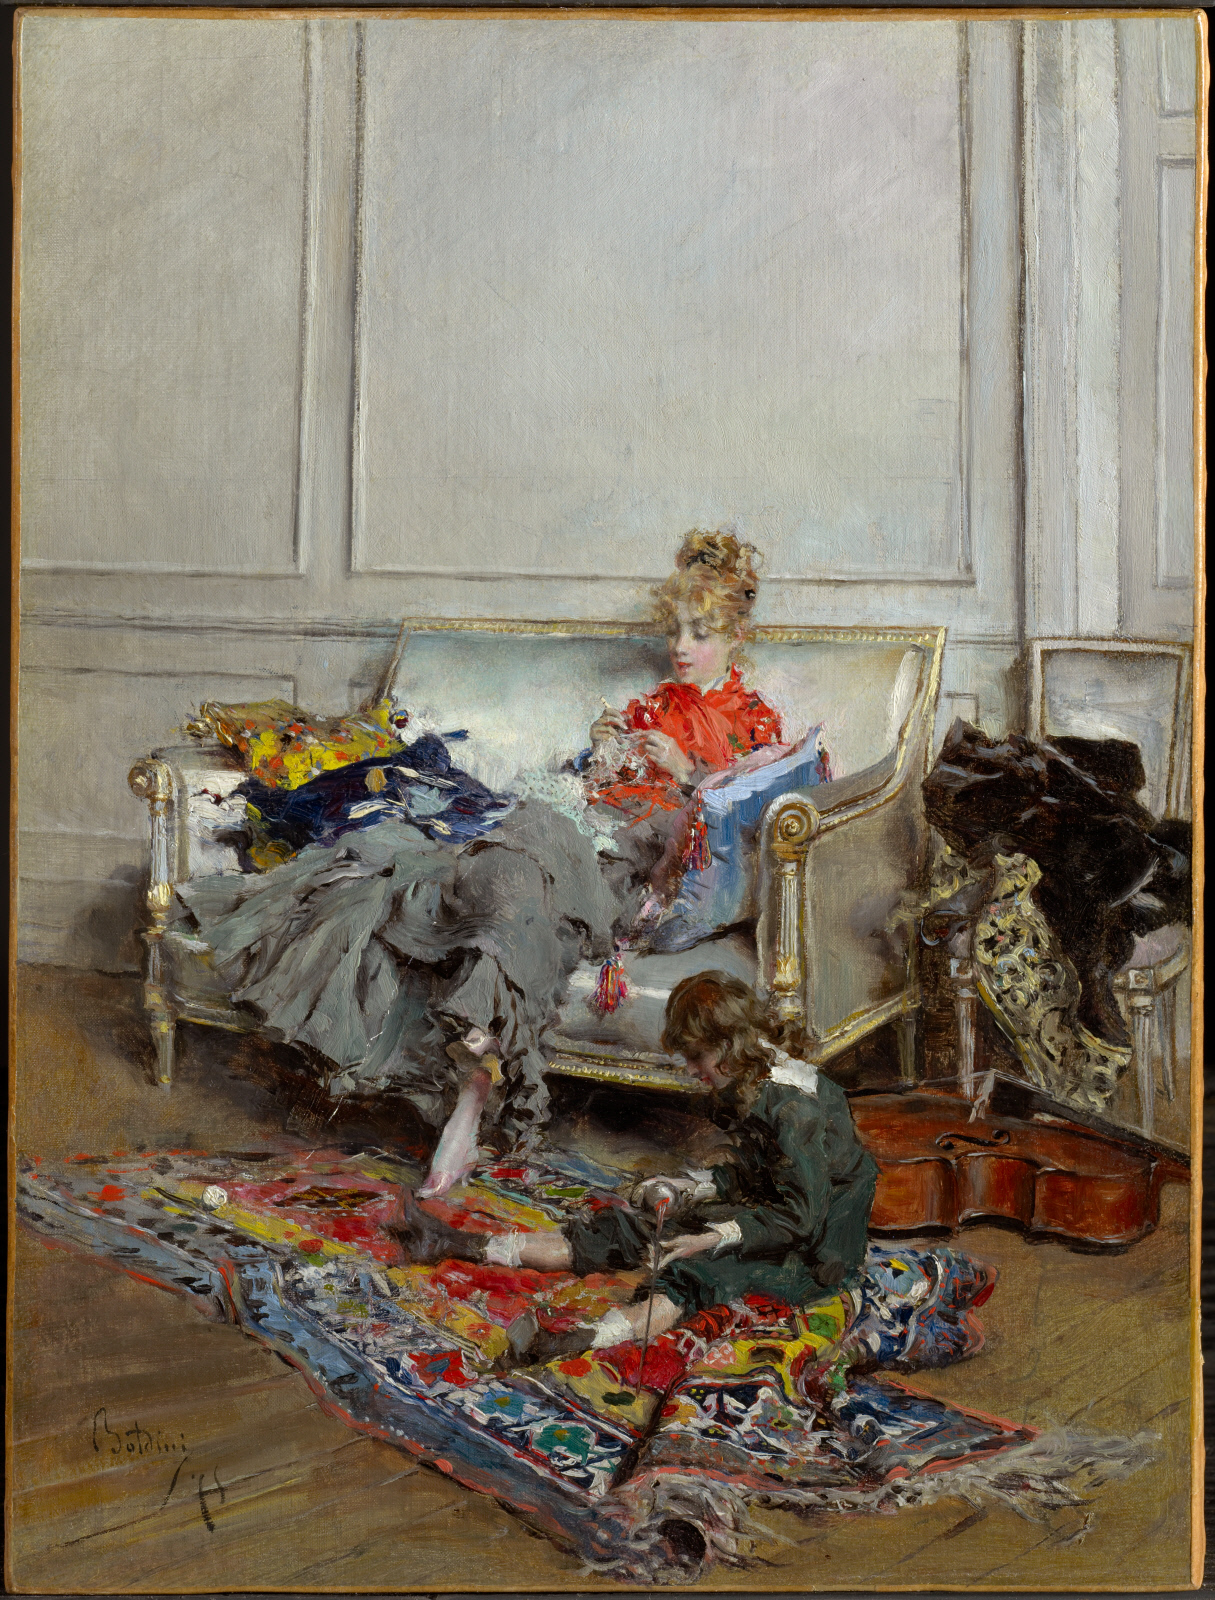 Young Woman Crocheting by Giovanni Boldini - 1875 - 36.2 x 27.4 cm The Clark